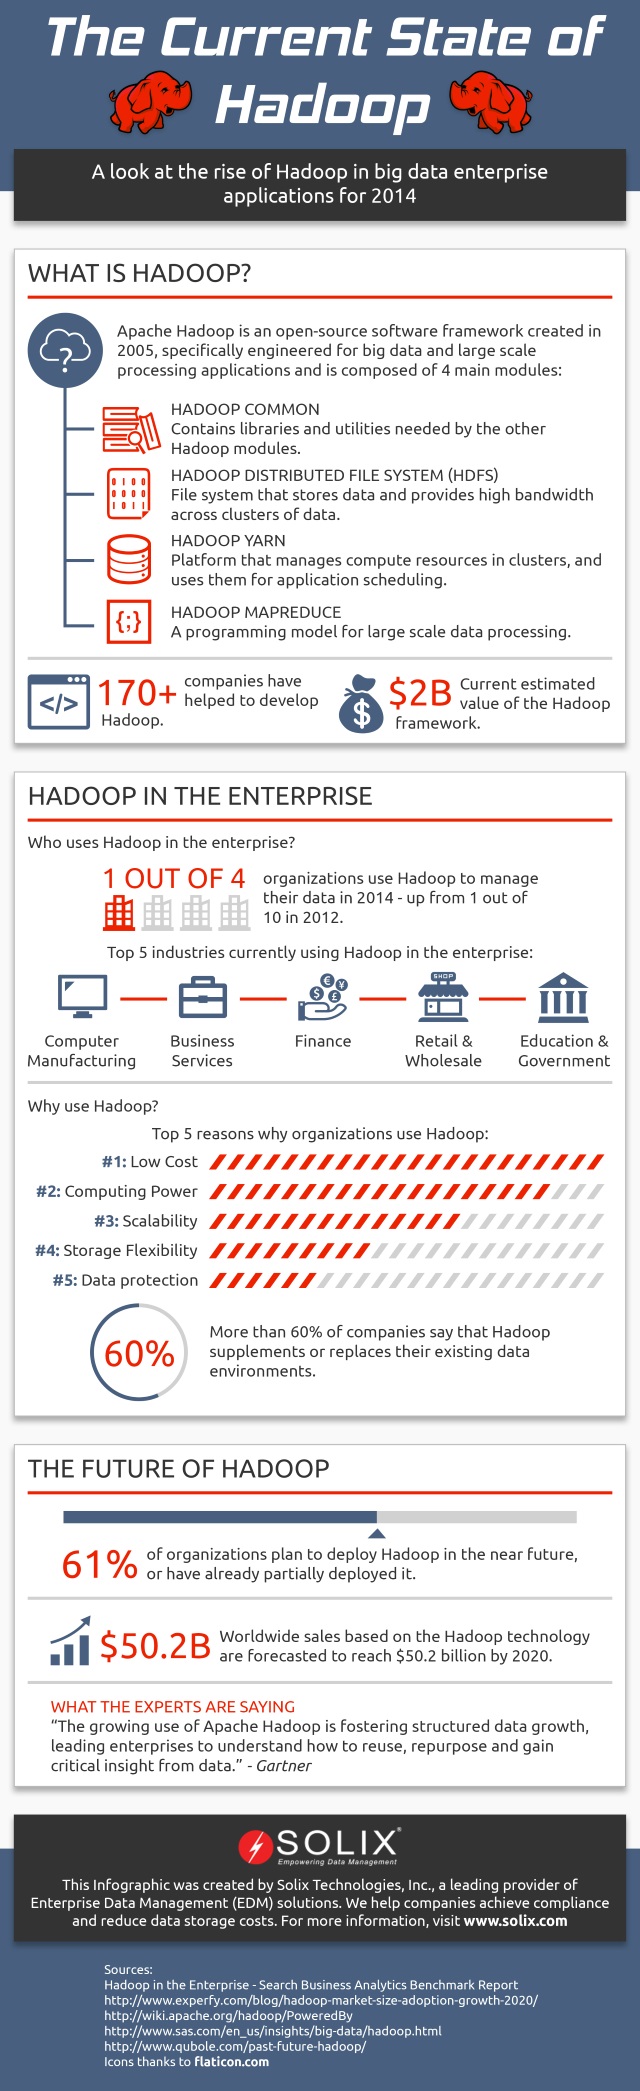 Current-State-of-Hadoop-Infographic-640